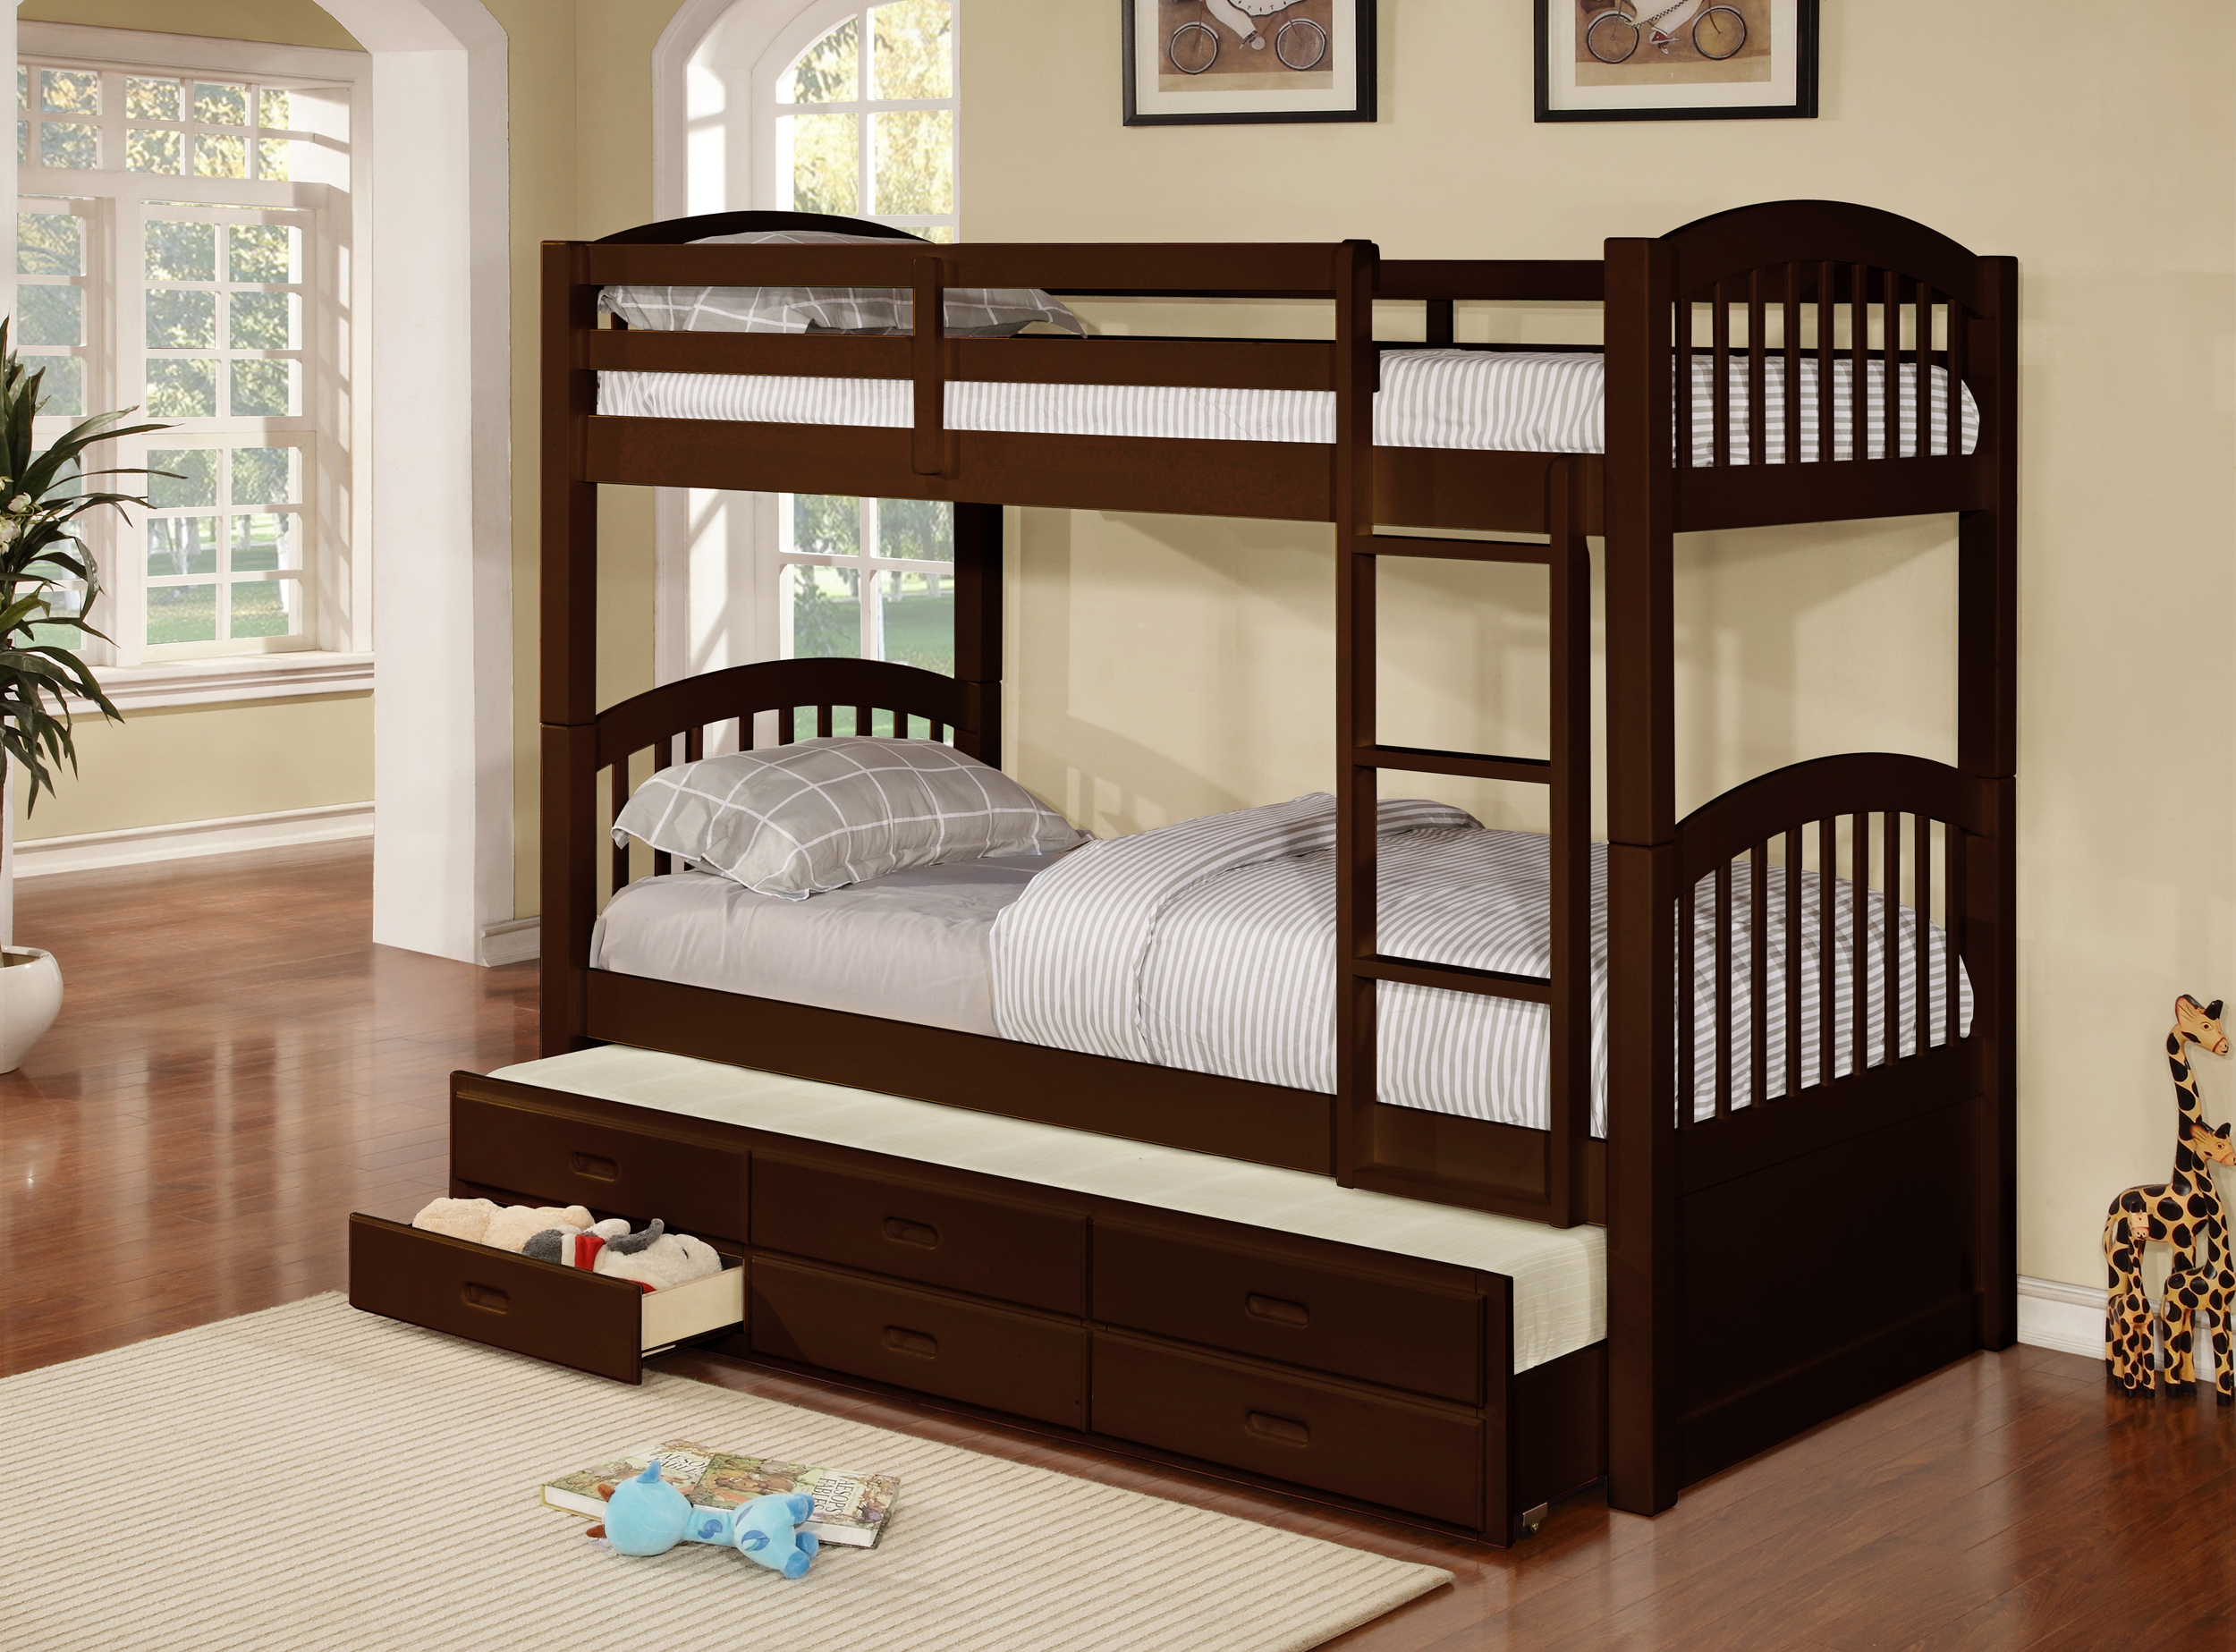 tri level bunk beds